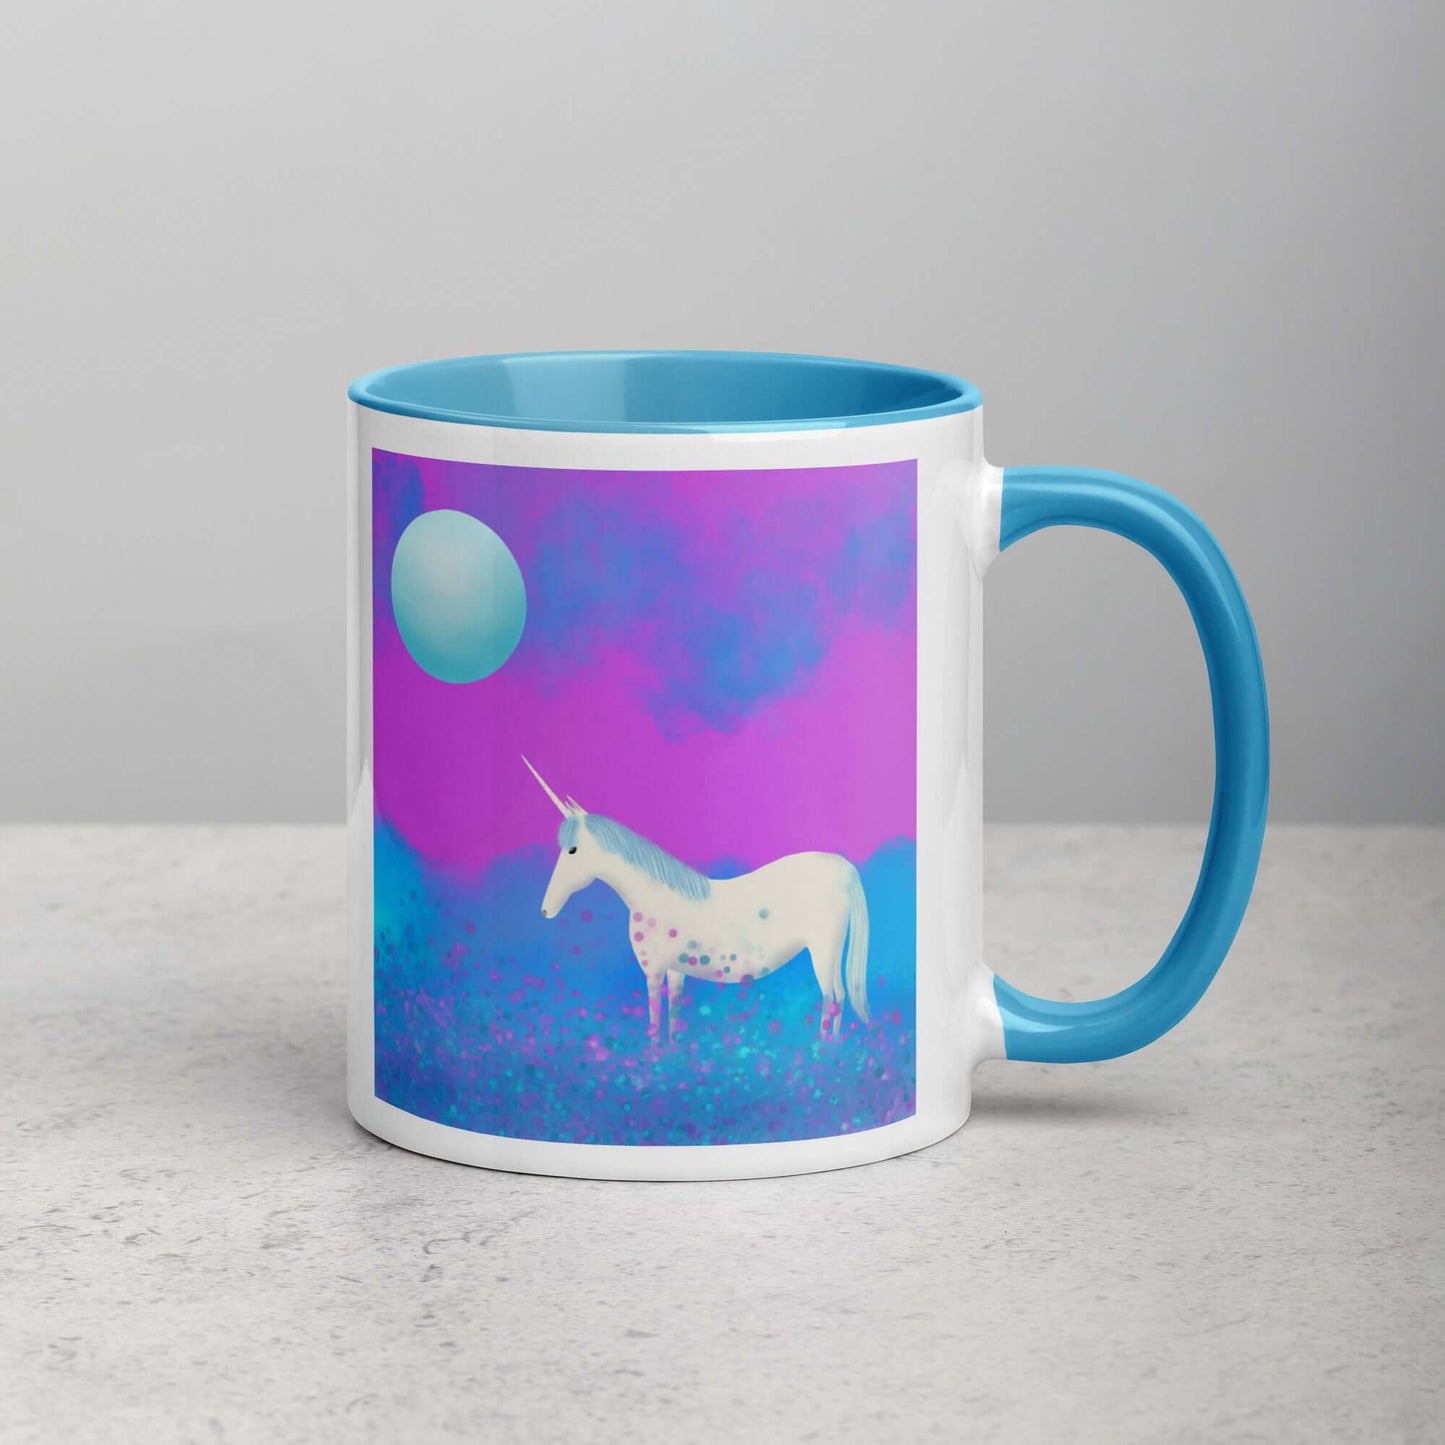 Blue and Purple Unicorn in the Mist with Full Moon “Mystical Unicorn” Mug with Light Blue Color Inside Right Handed Side View